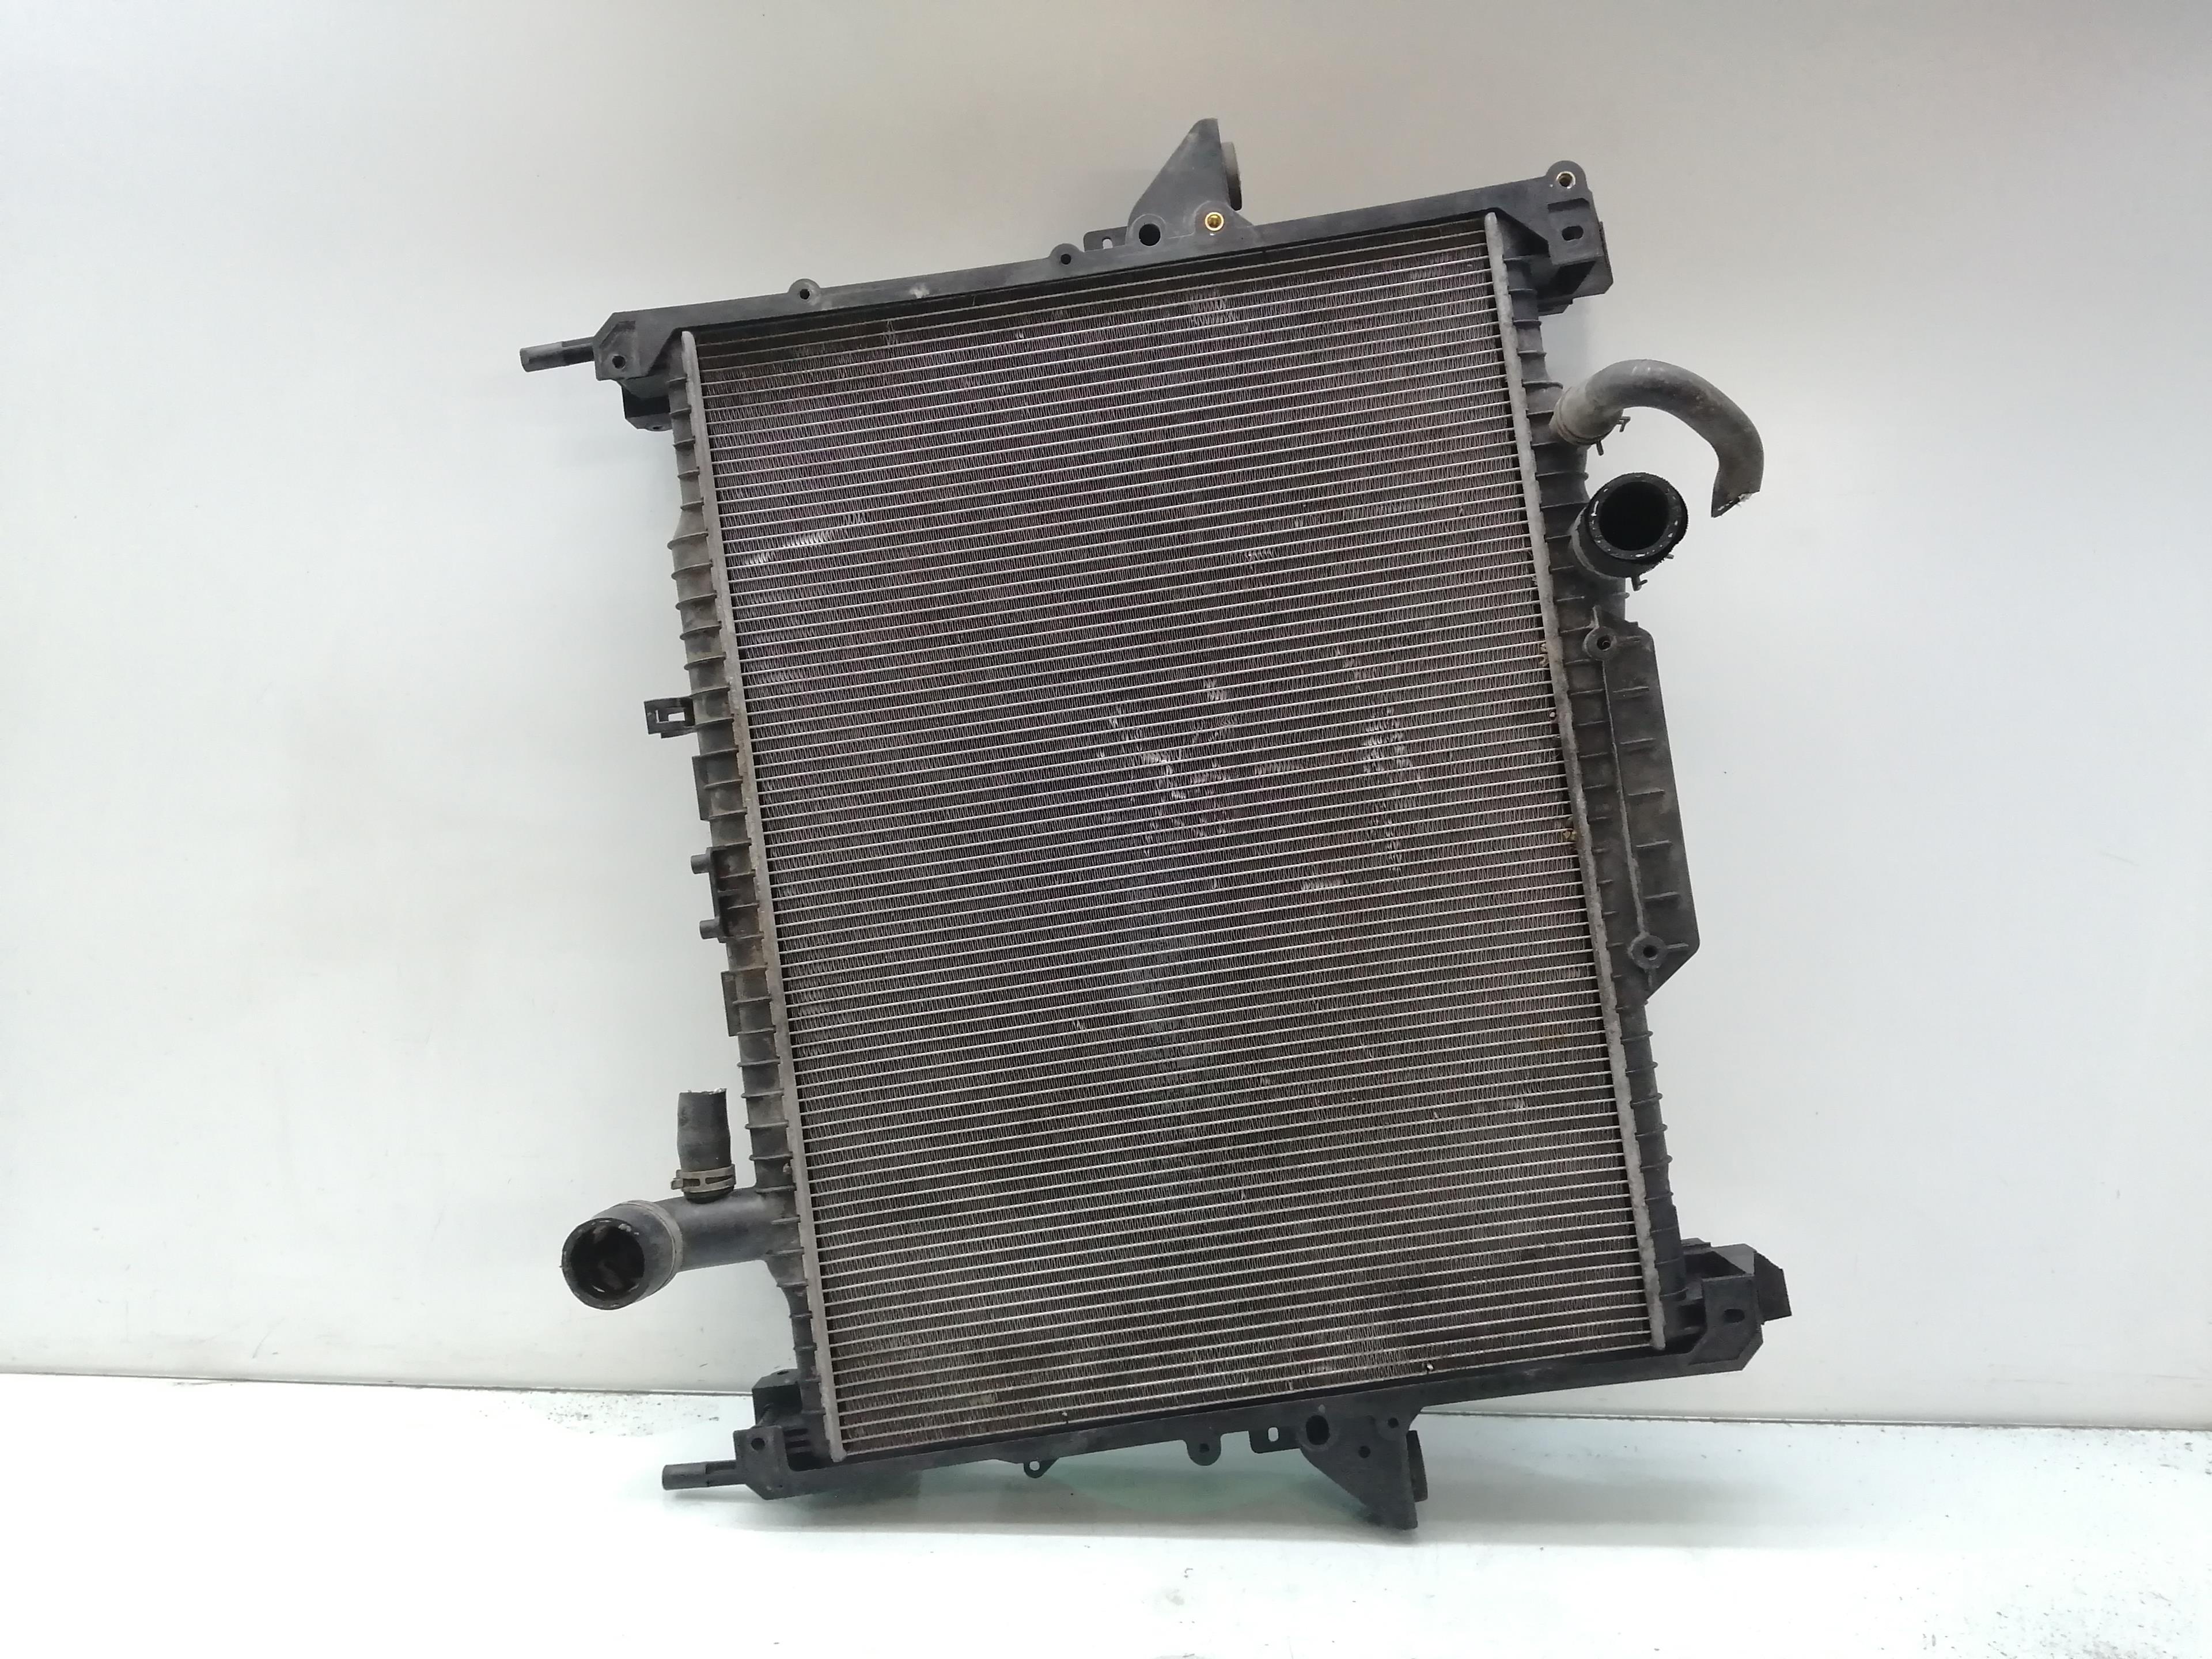 LAND ROVER Discovery 4 generation (2009-2016) Air Con Radiator LR015561 25185993